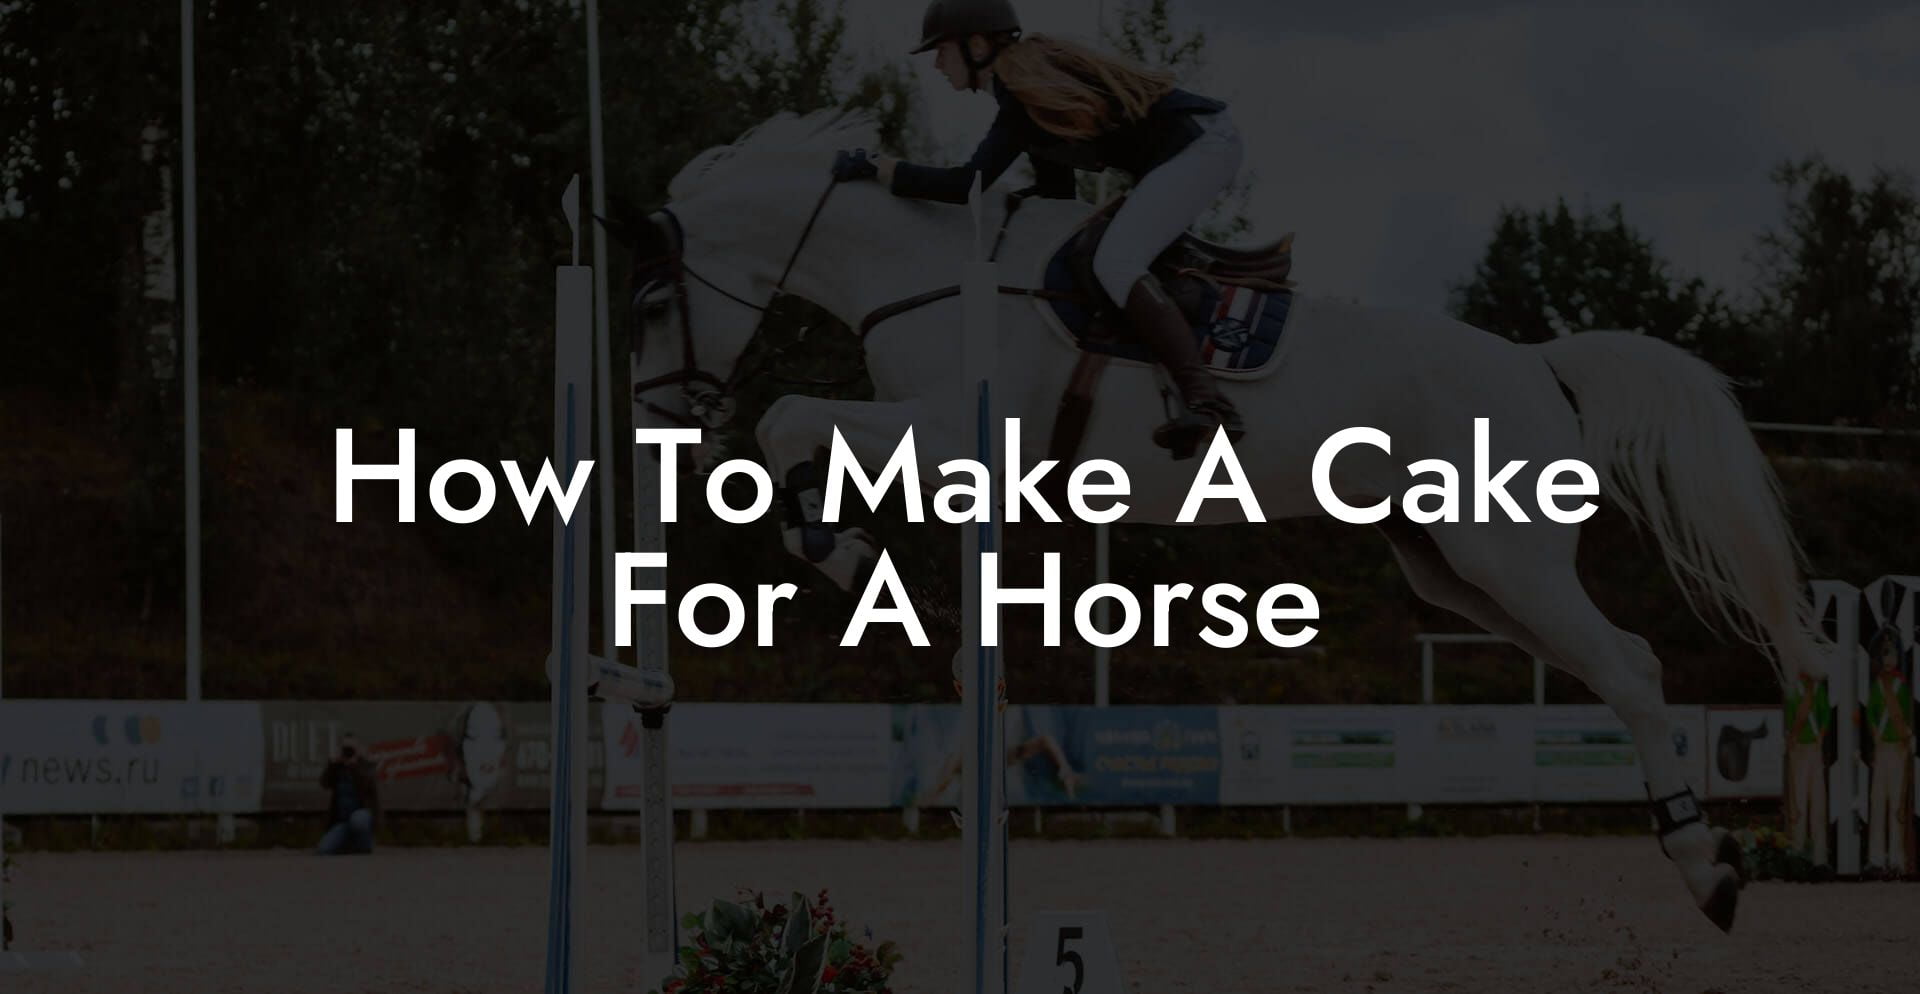 How To Make A Cake For A Horse